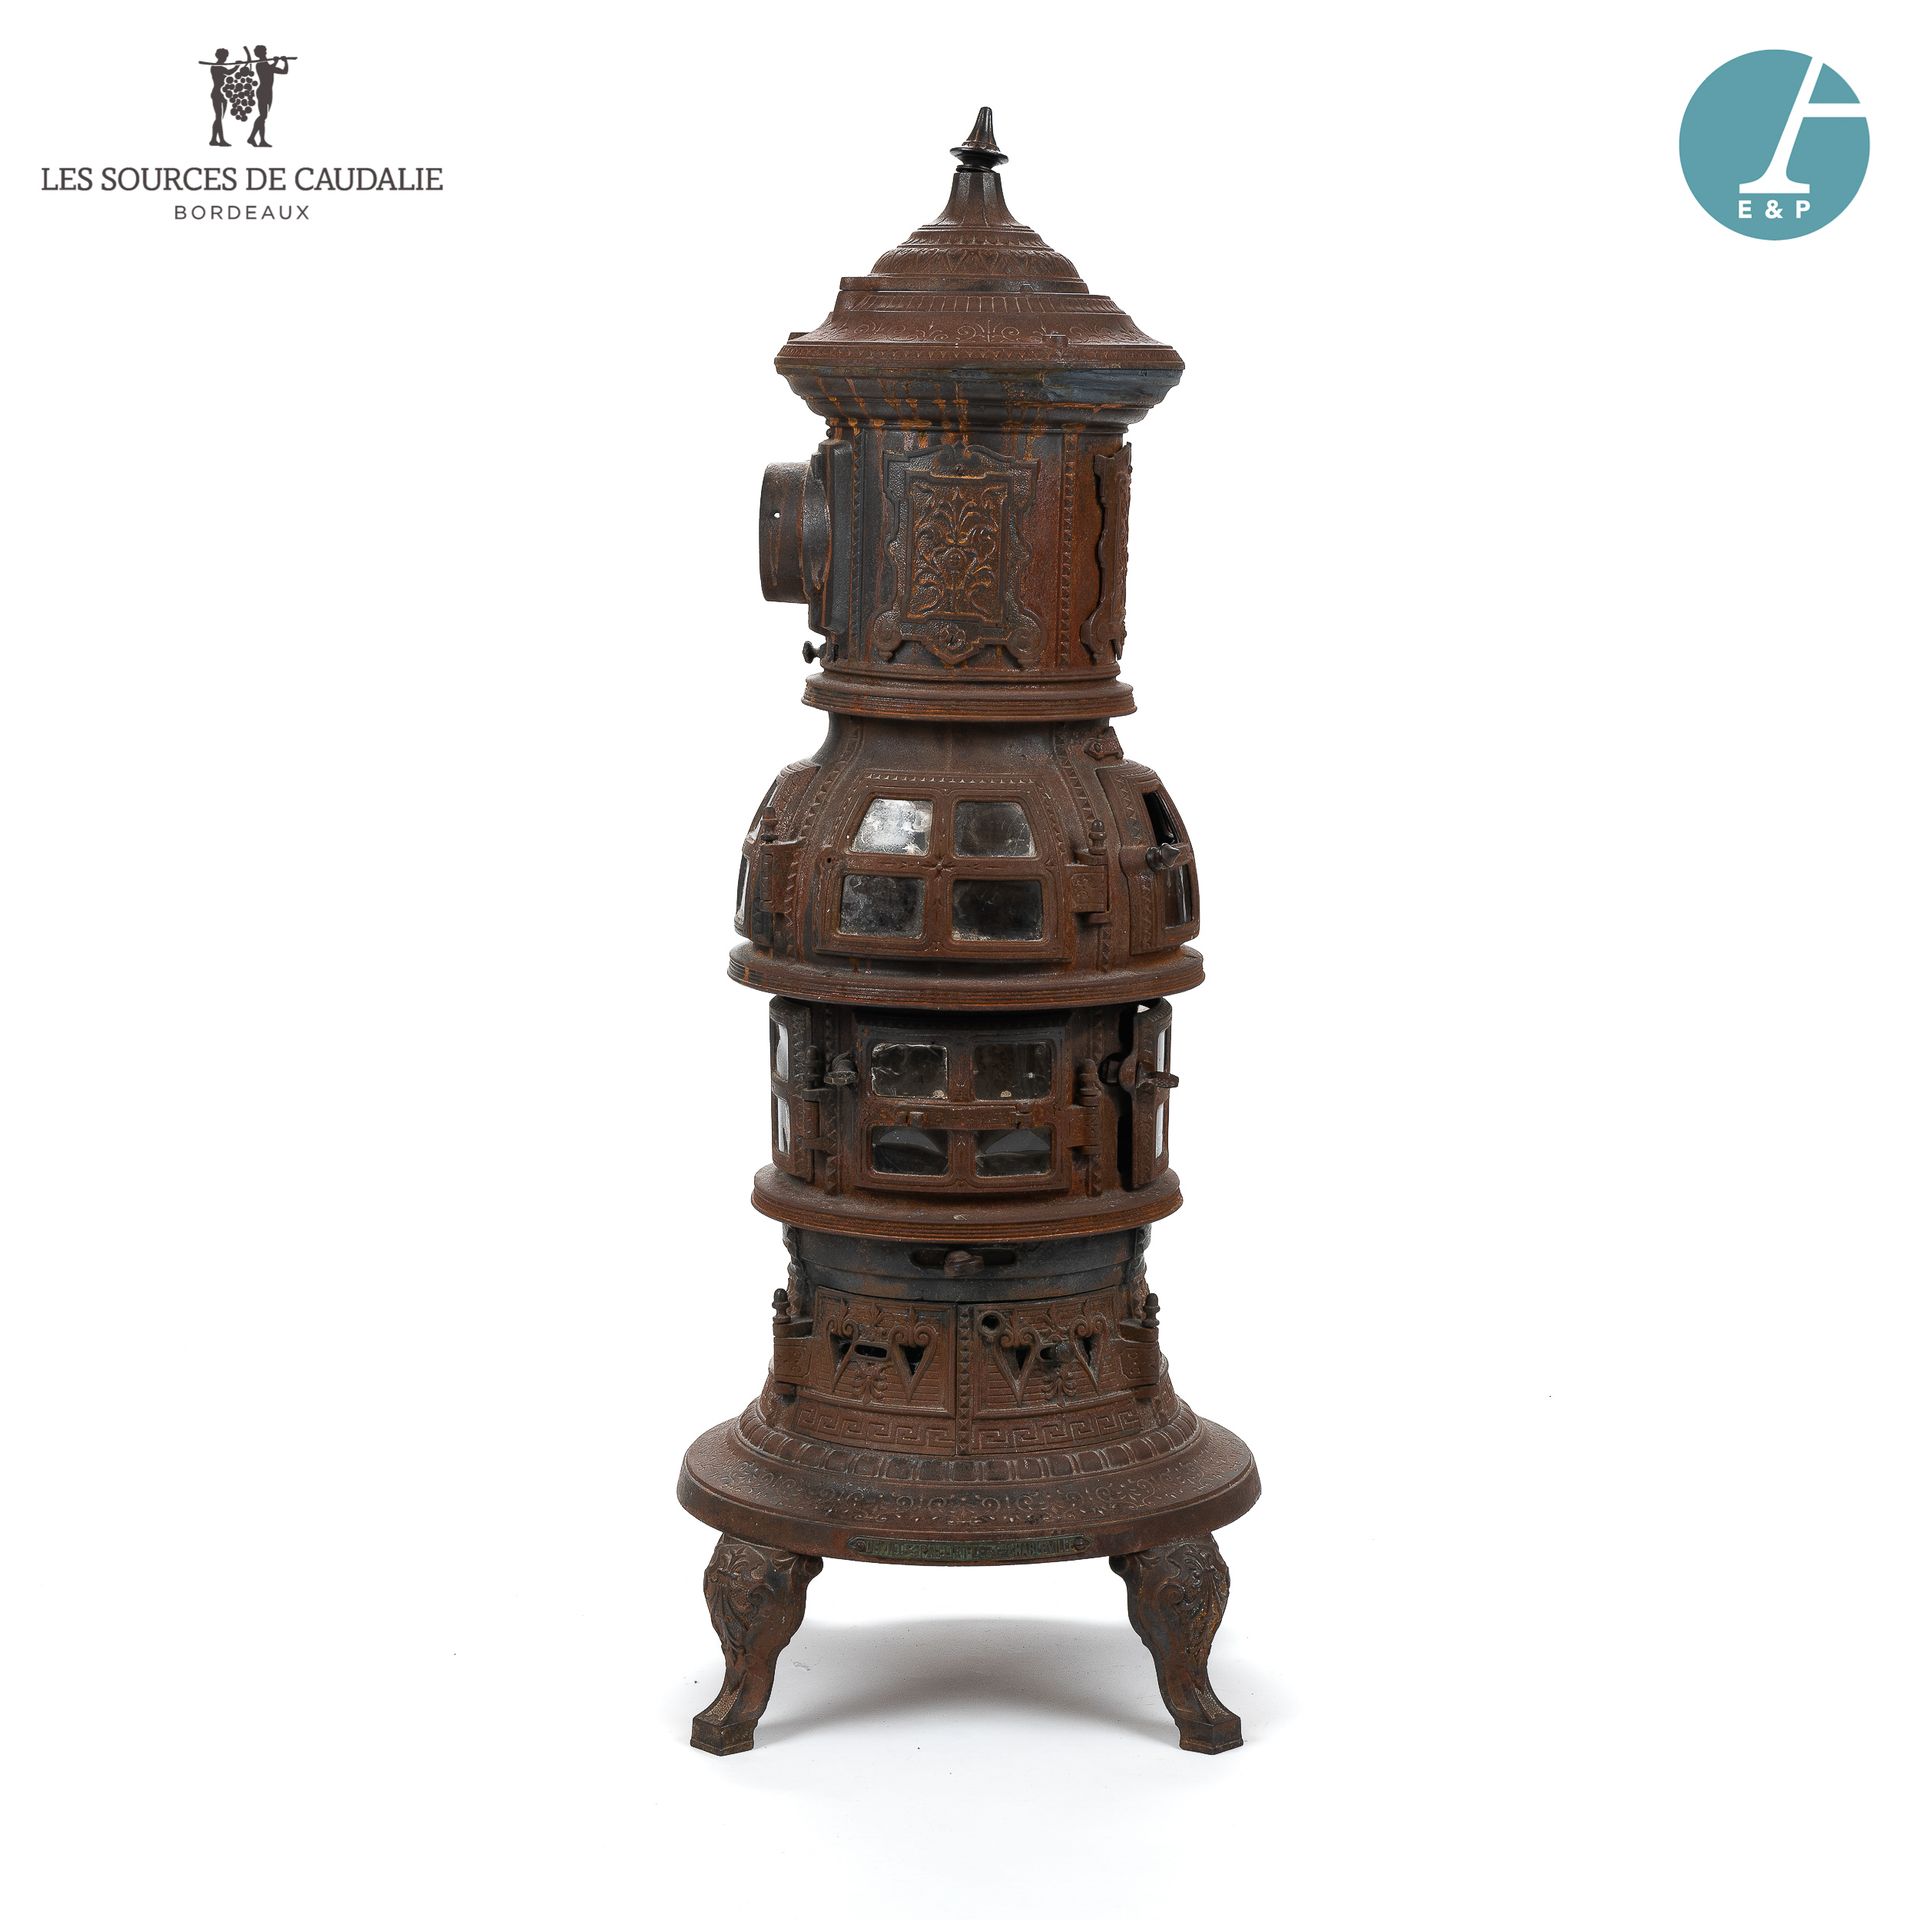 Null From Room n°4 "Les Douelles

Four-stage cast iron stove with geometric and &hellip;